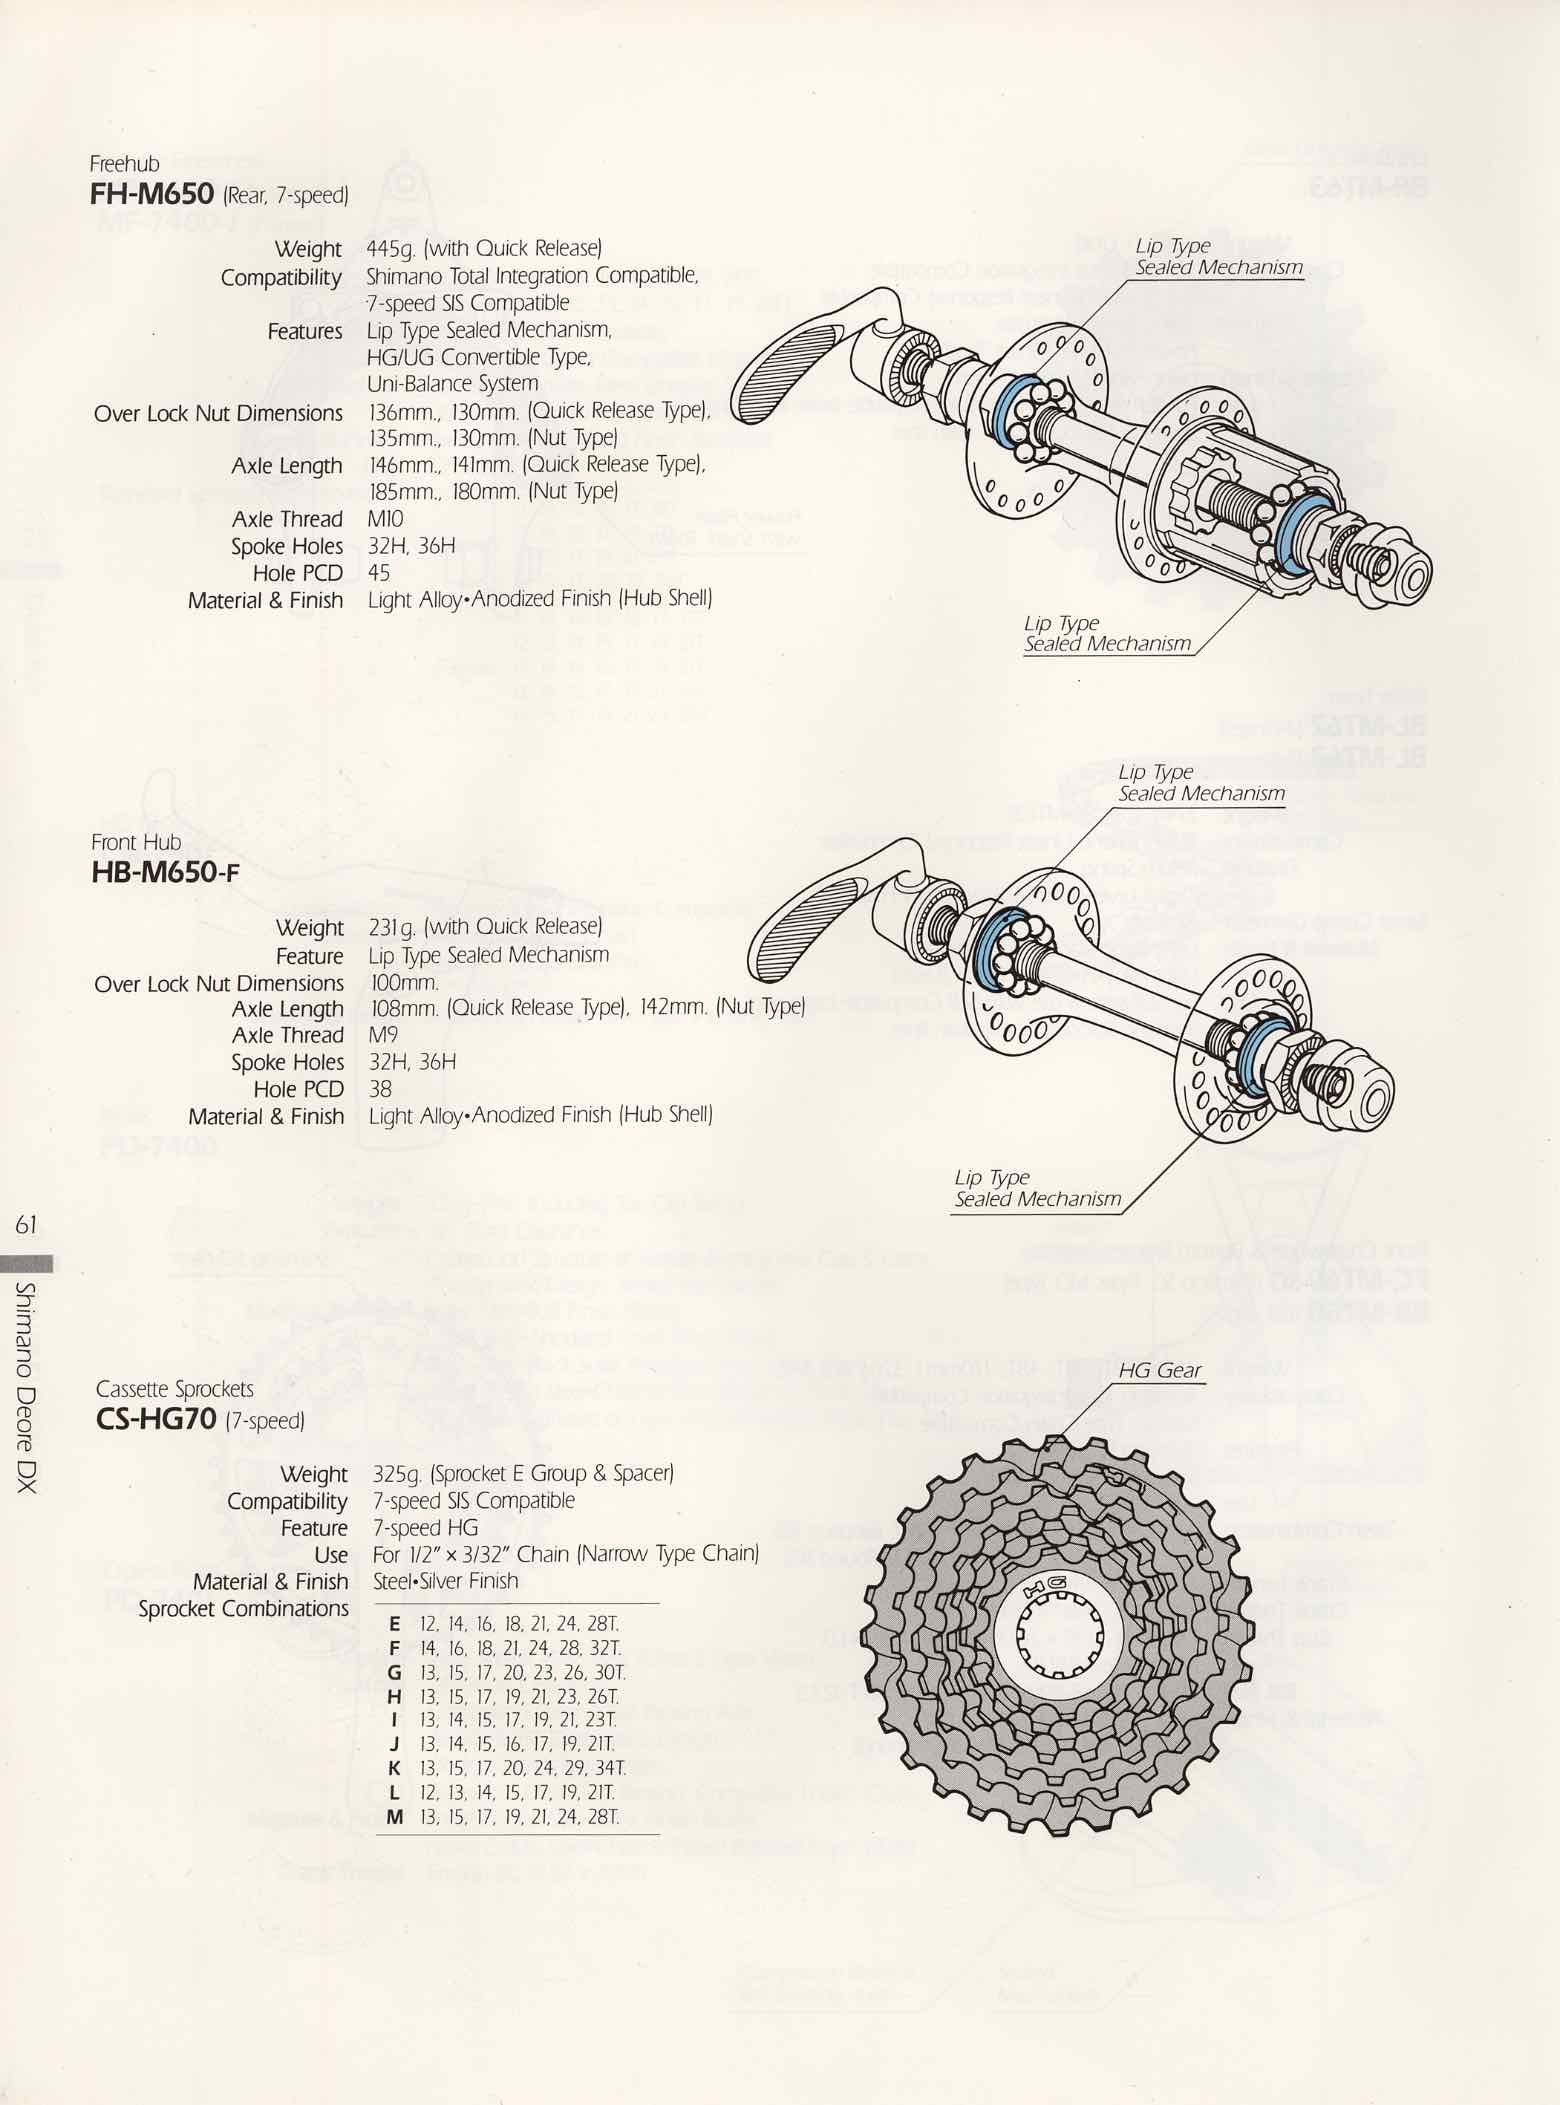 Shimano Bicycle System Component - 91 Page 61 main image